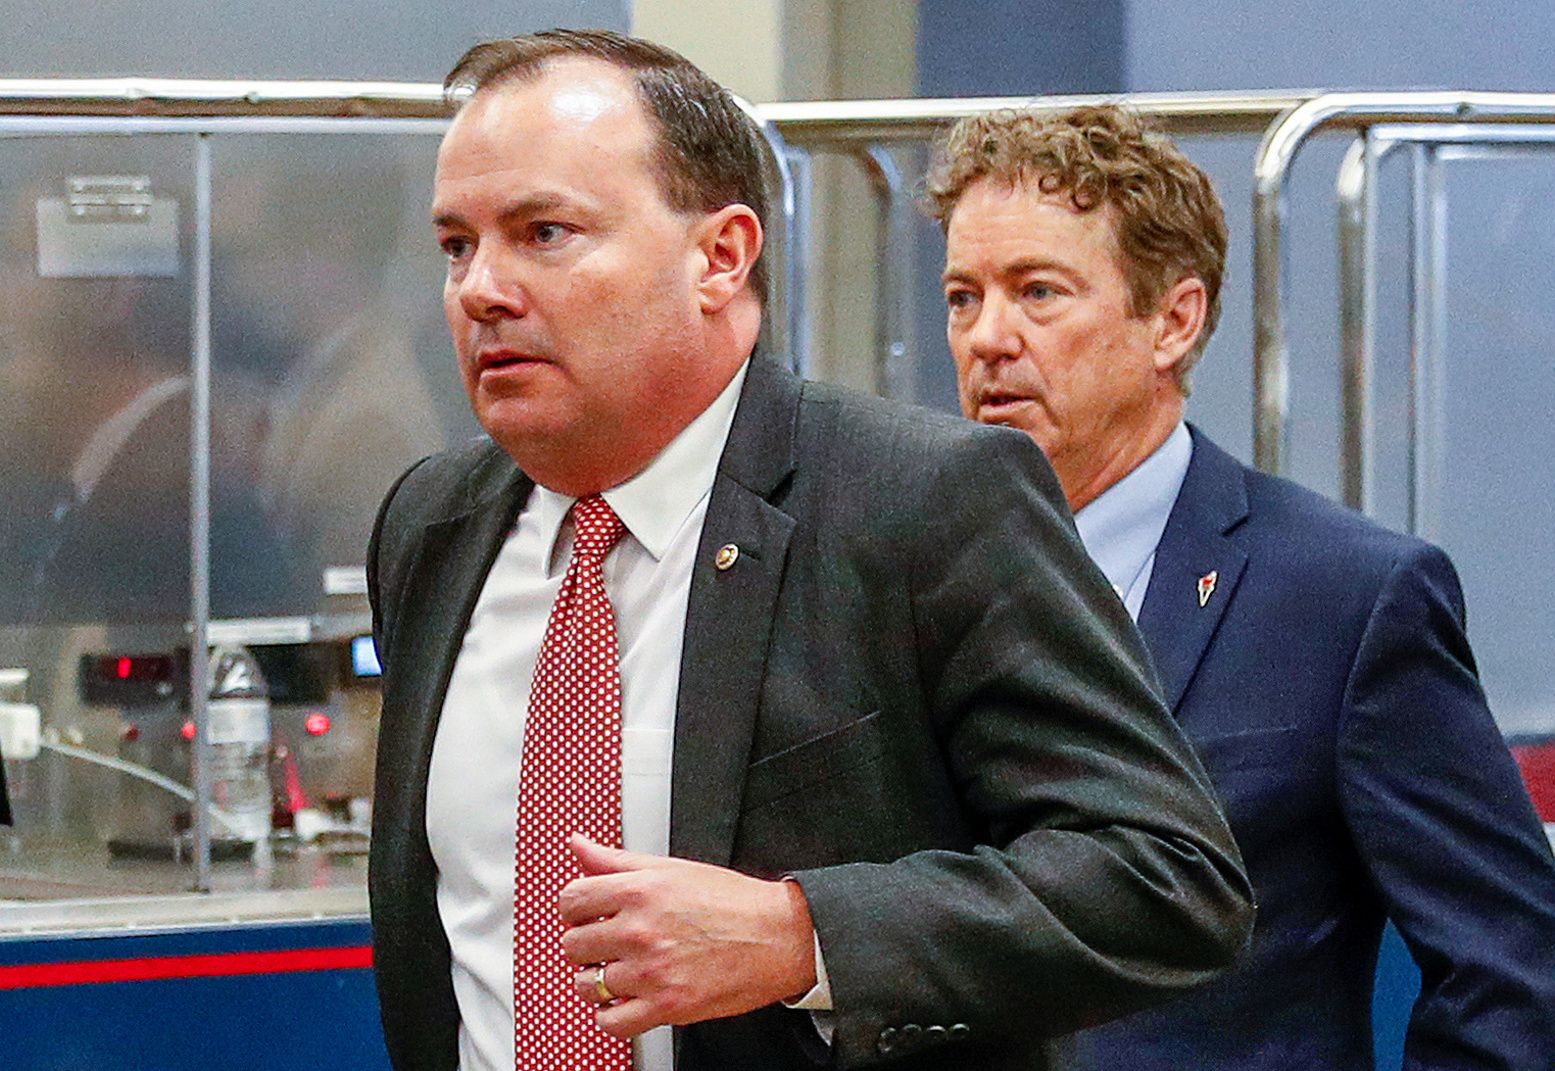 Mike Lee Deserves Answers on Iran | The National Interest